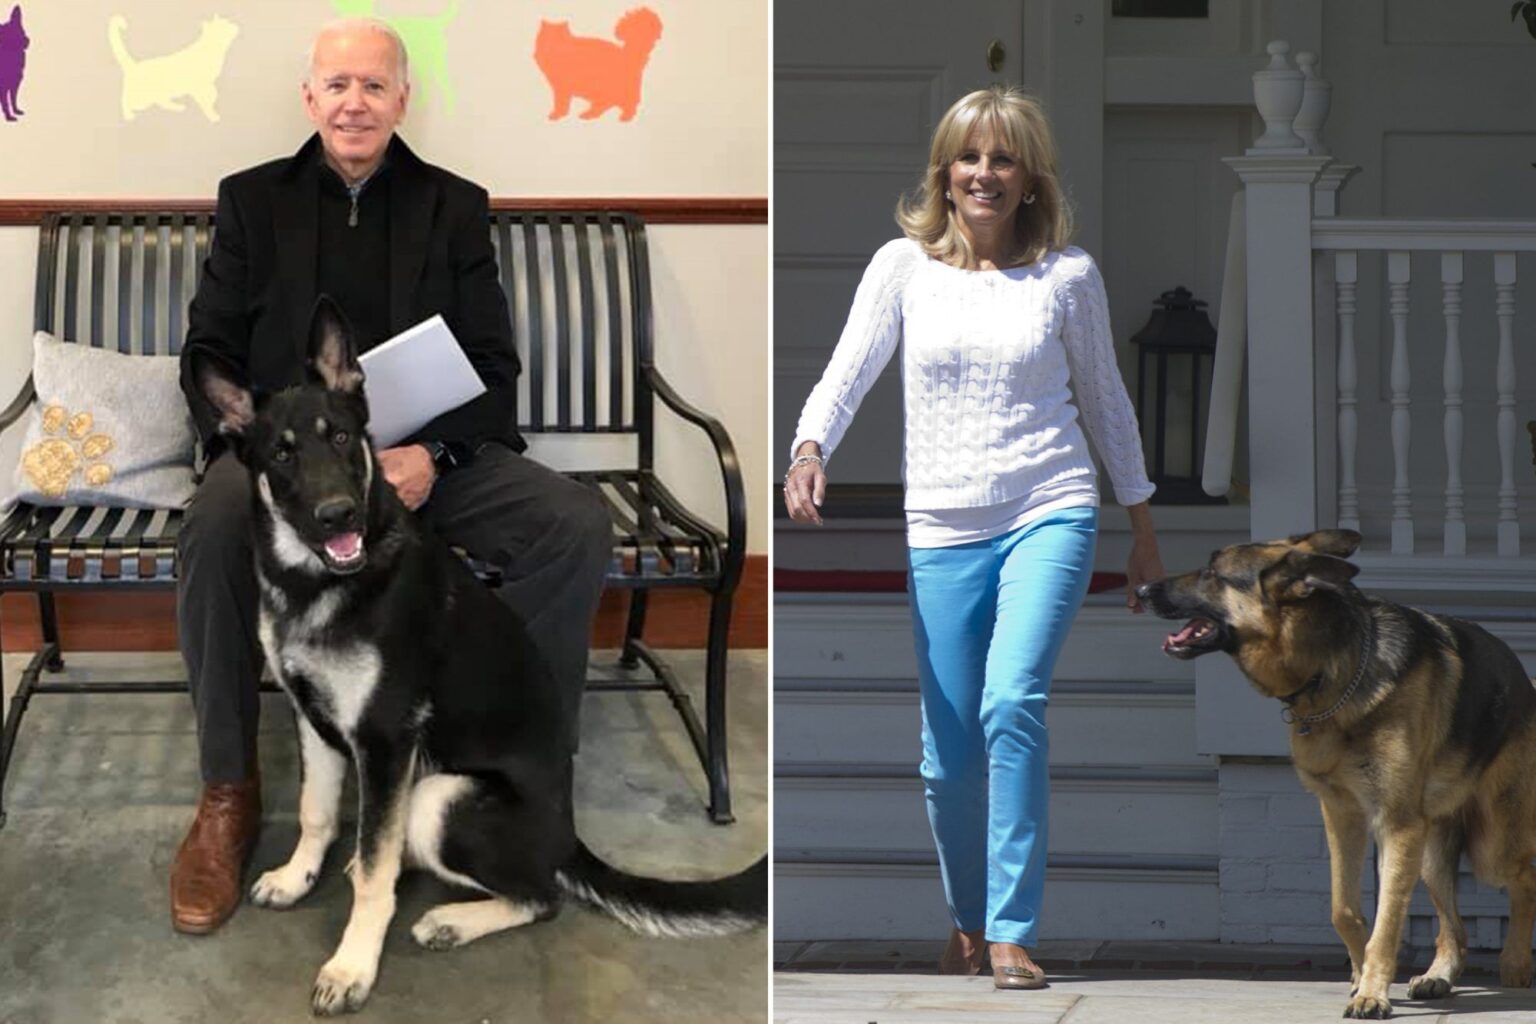 The White House may get to see two good dogs again. Will Joe Biden bring his dogs? Here's what you need to know.